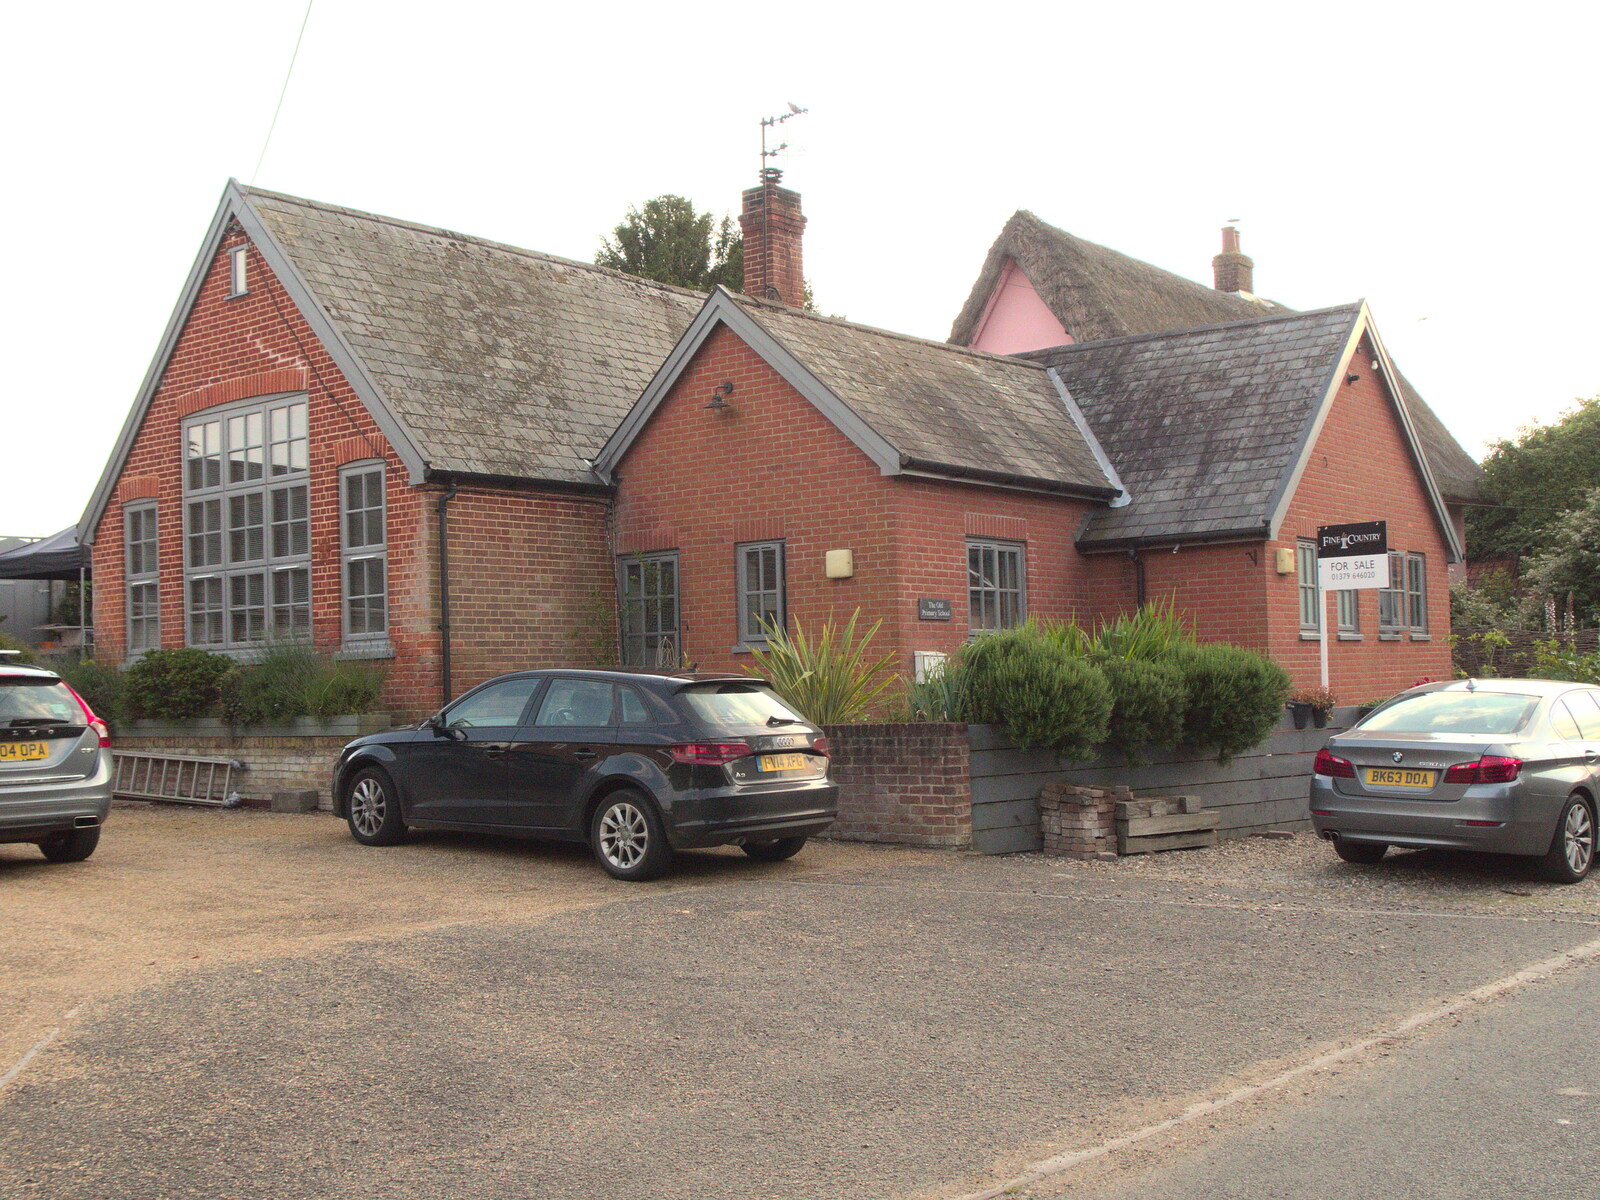 The old school in Gislingham from The BSCC at The Crown, Gissing, Norfolk - 22nd July 2021